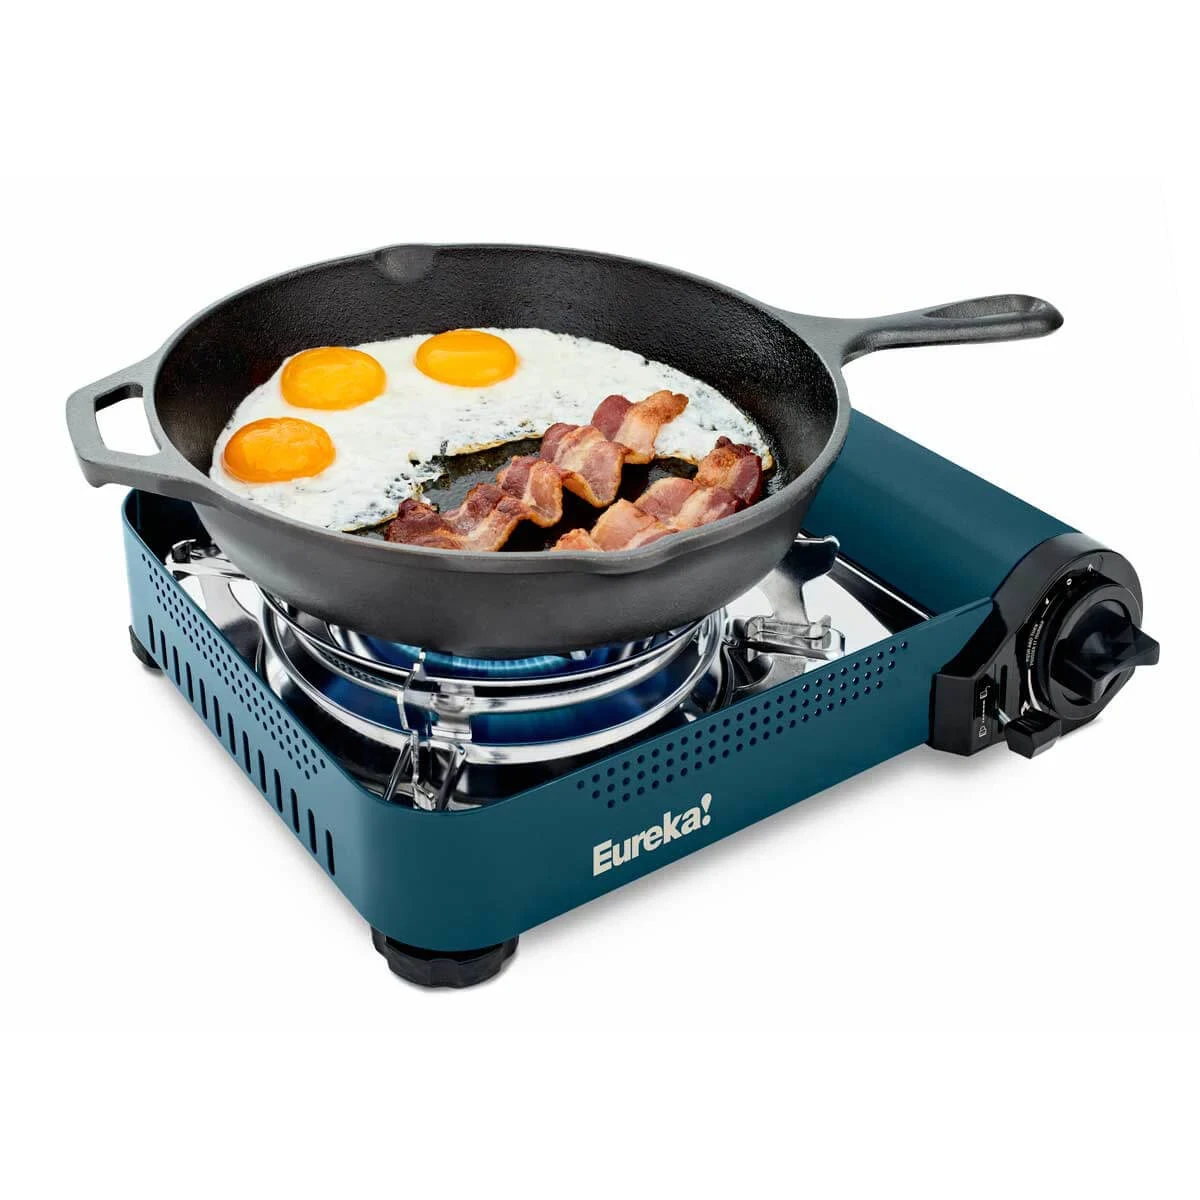 SPRK⁺ Camp Stove™ with frying pan